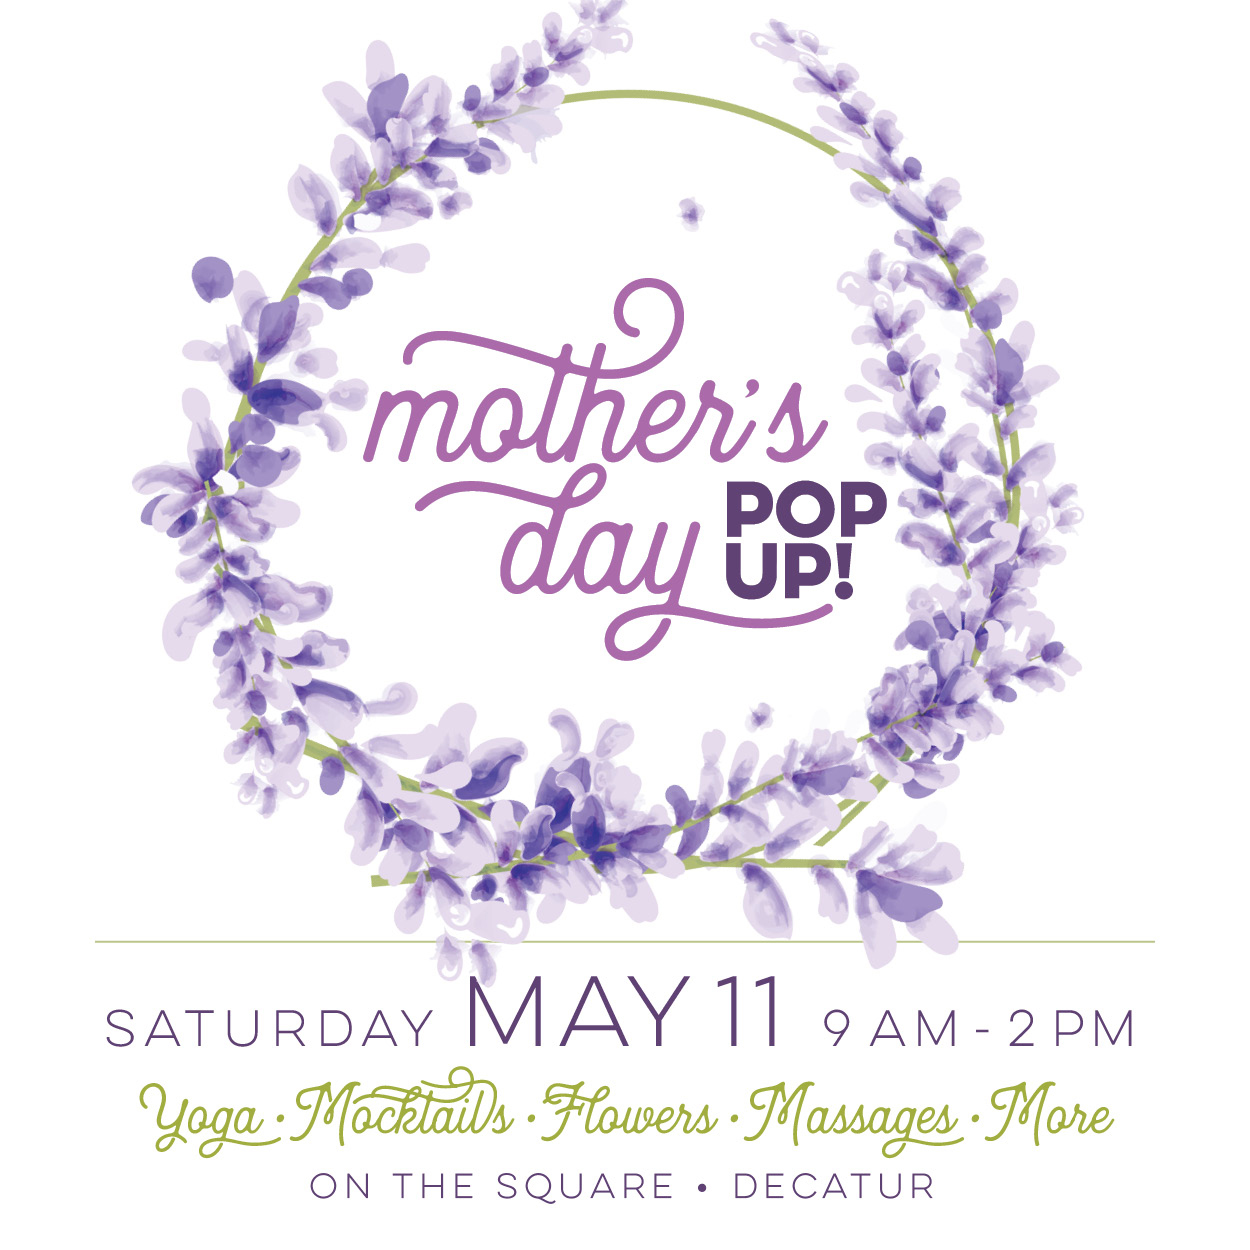 mothers-day-pop-up-graphics-041019-3